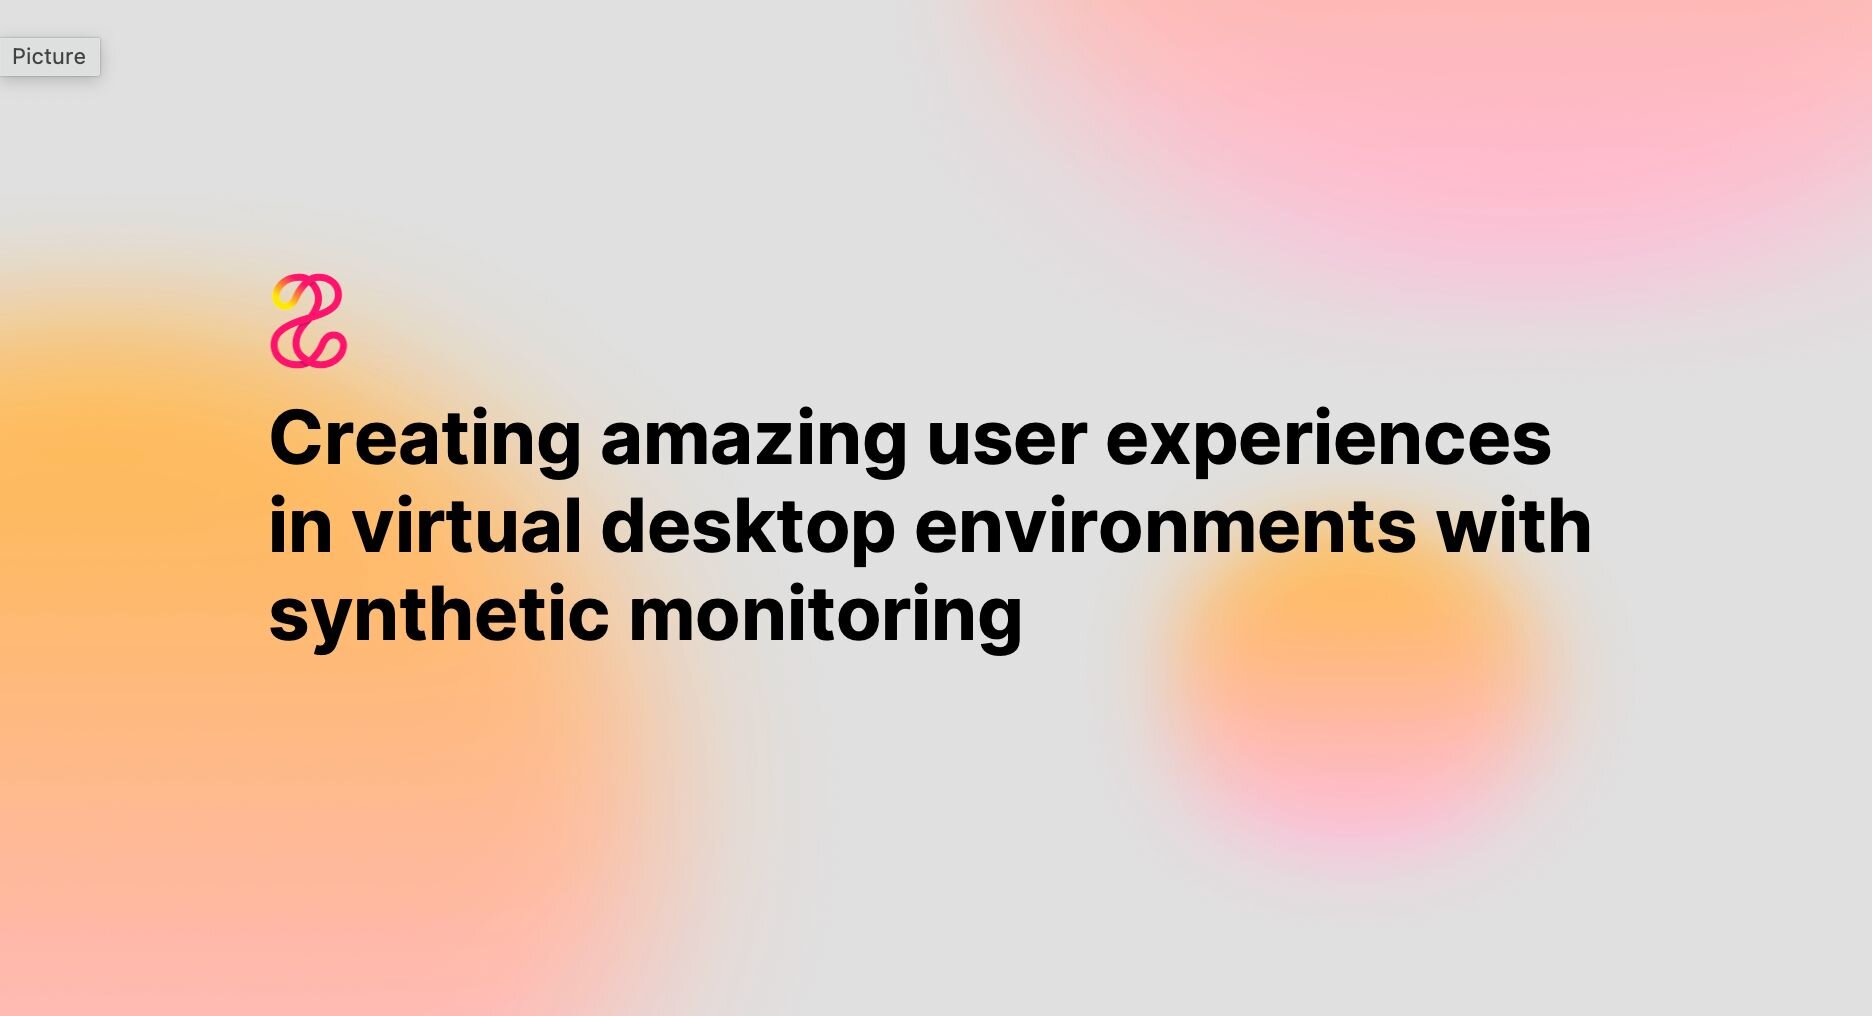 Creating amazing user experiences in virtual desktop environments with synthetic monitoring